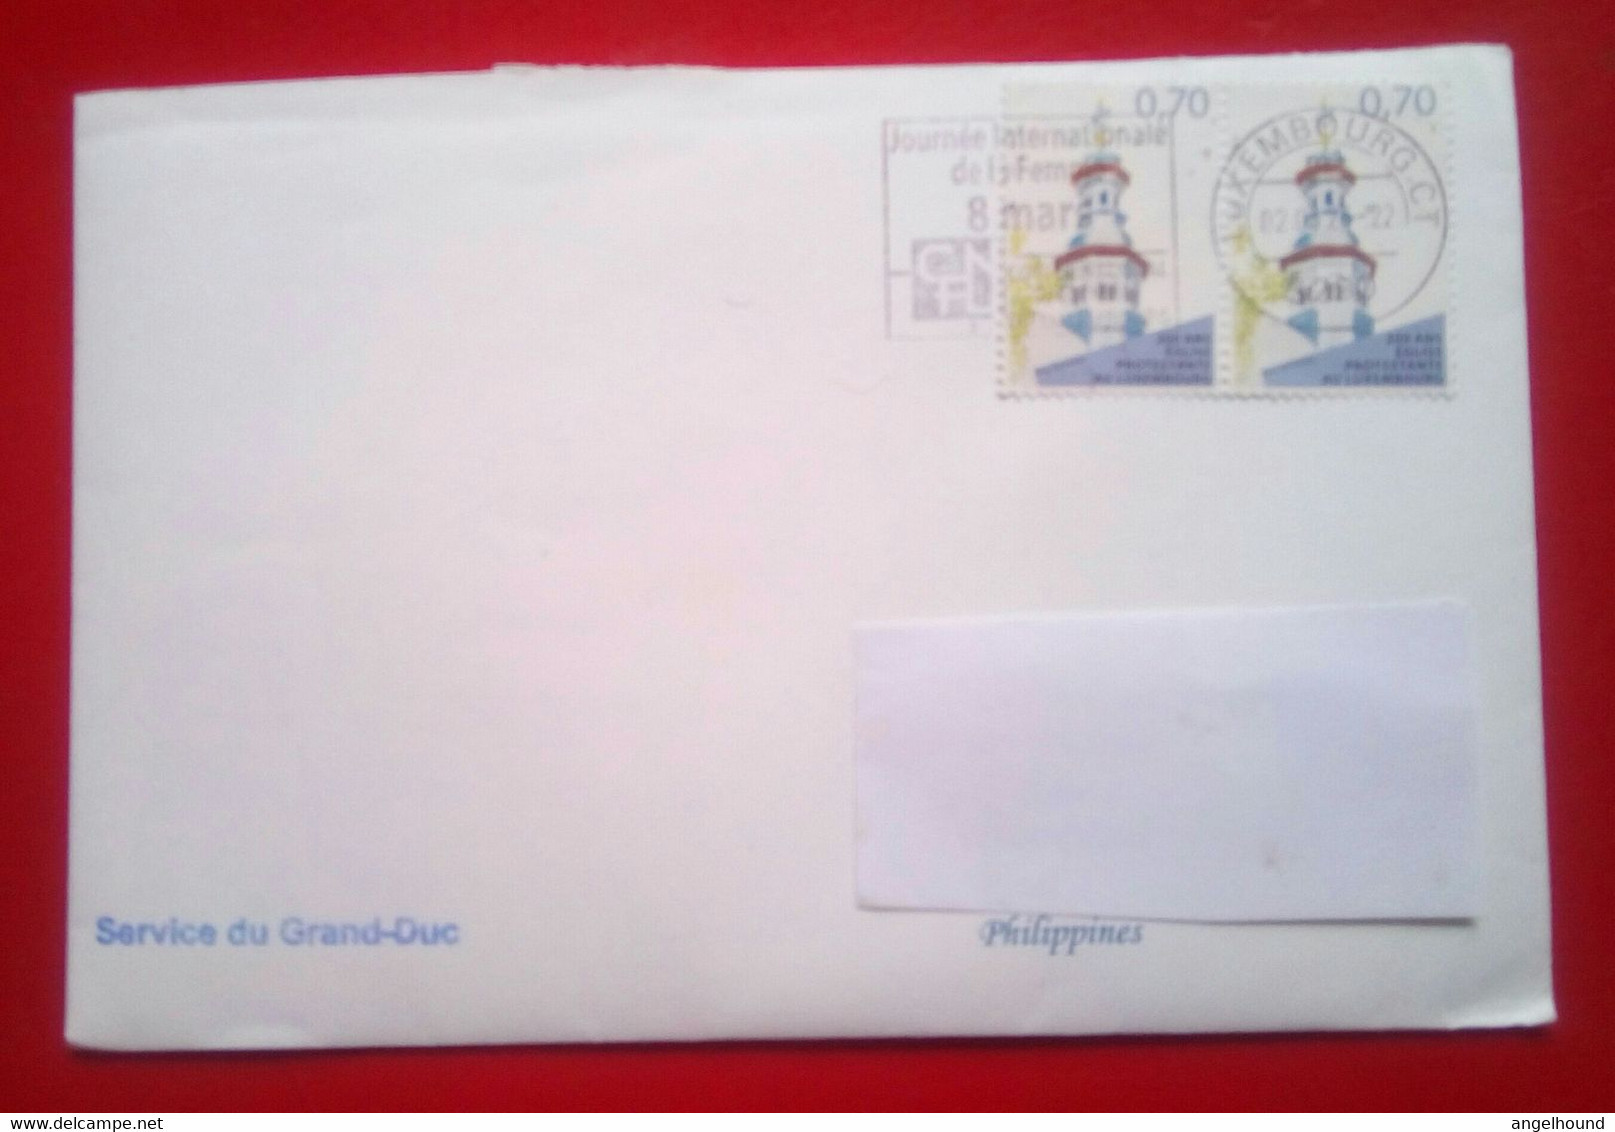 Cover From Grand Duke Of Luxembourg To Philippines - Covers & Documents